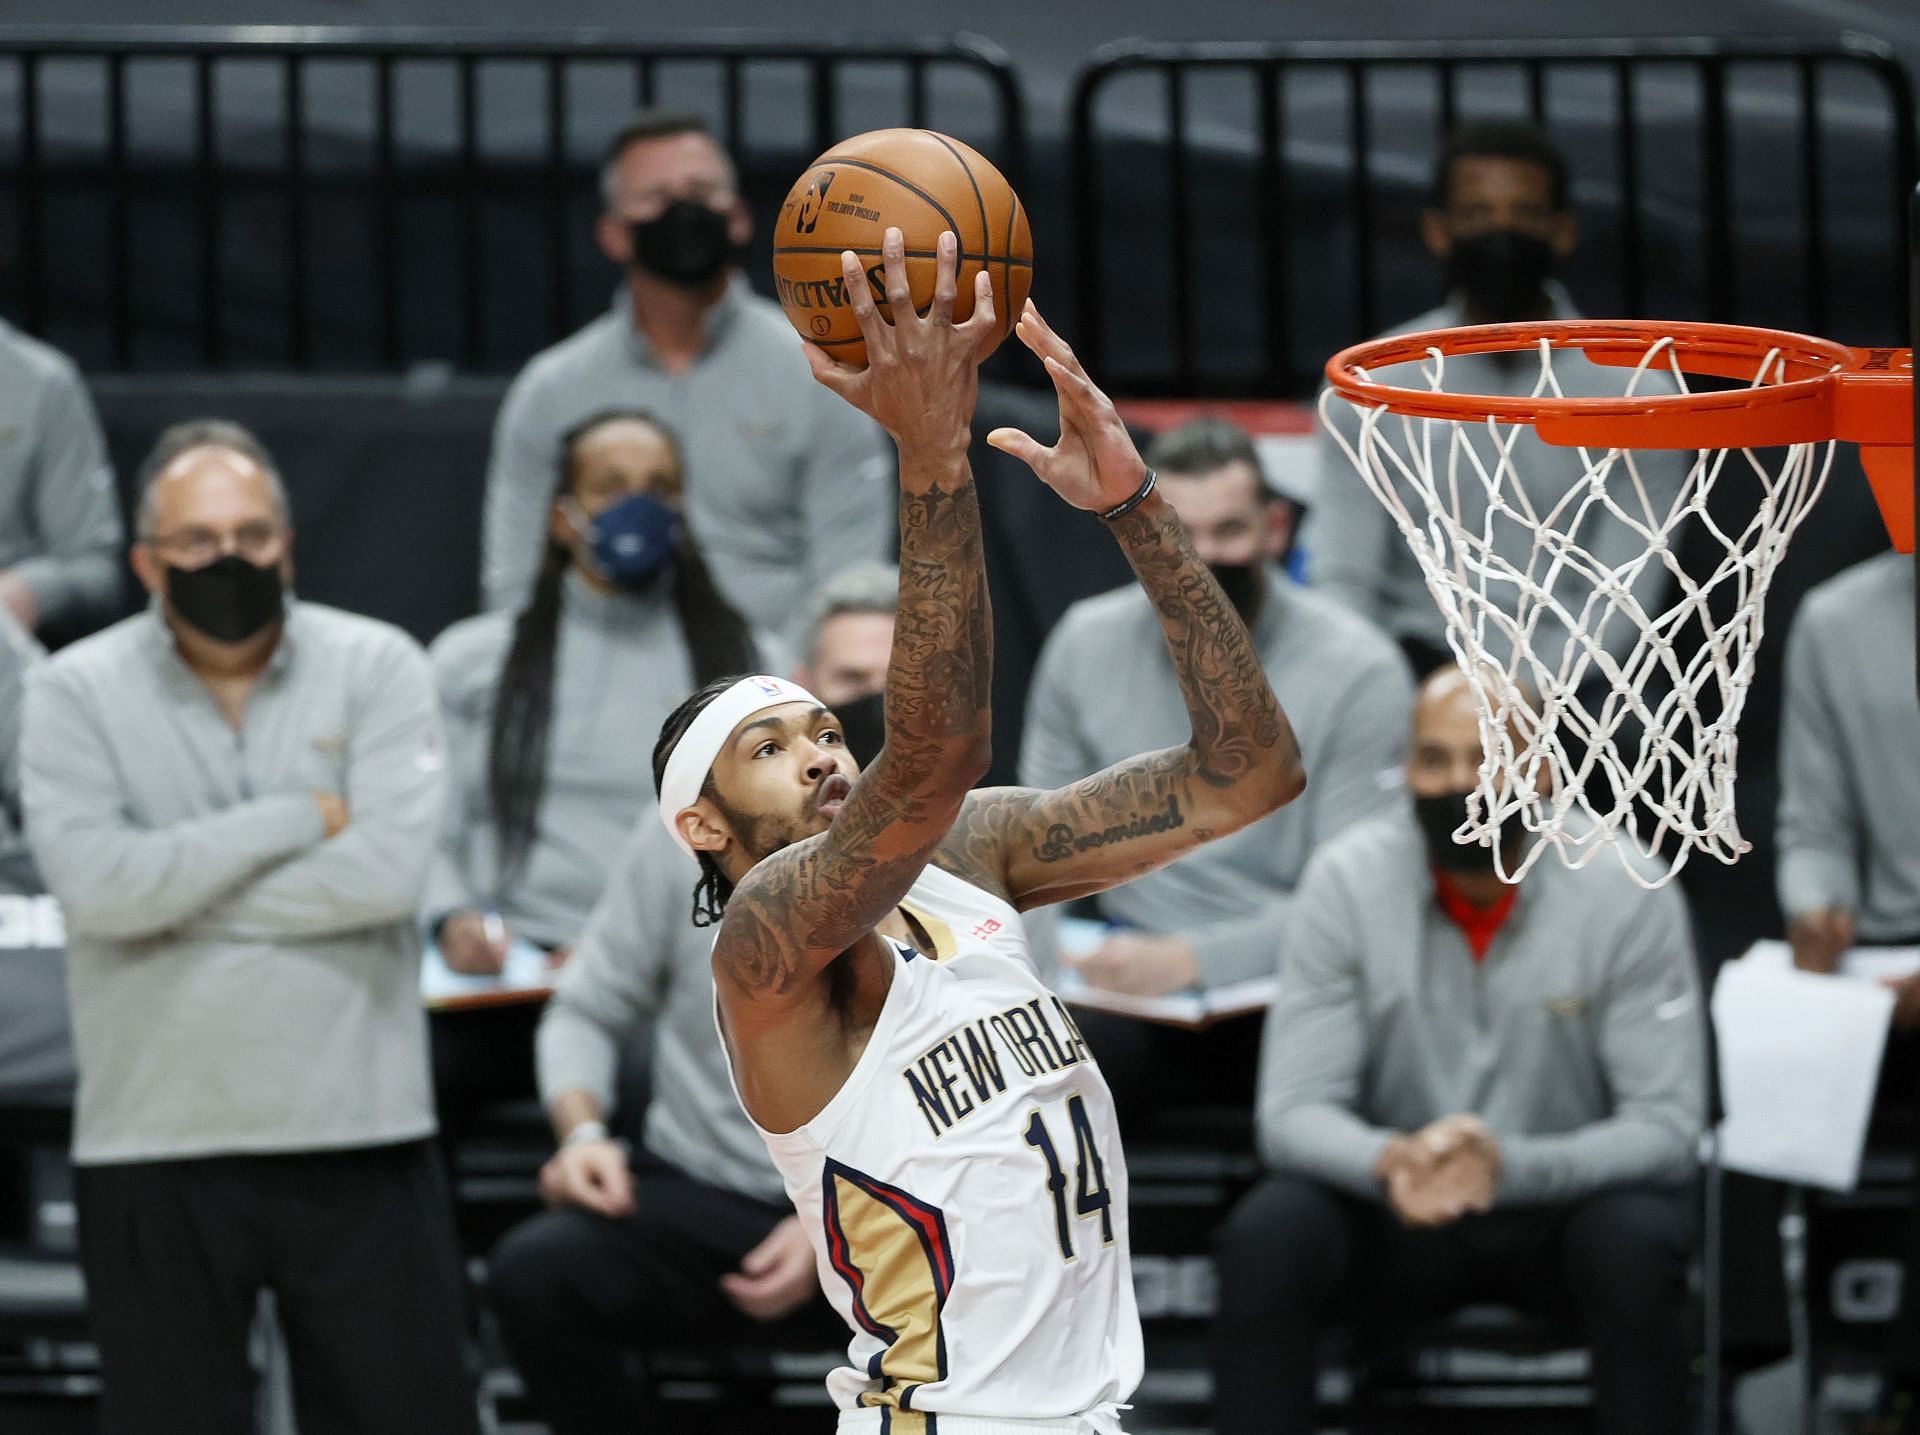 New Orleans Pelicans star Brandon Ingram goes up for a layup